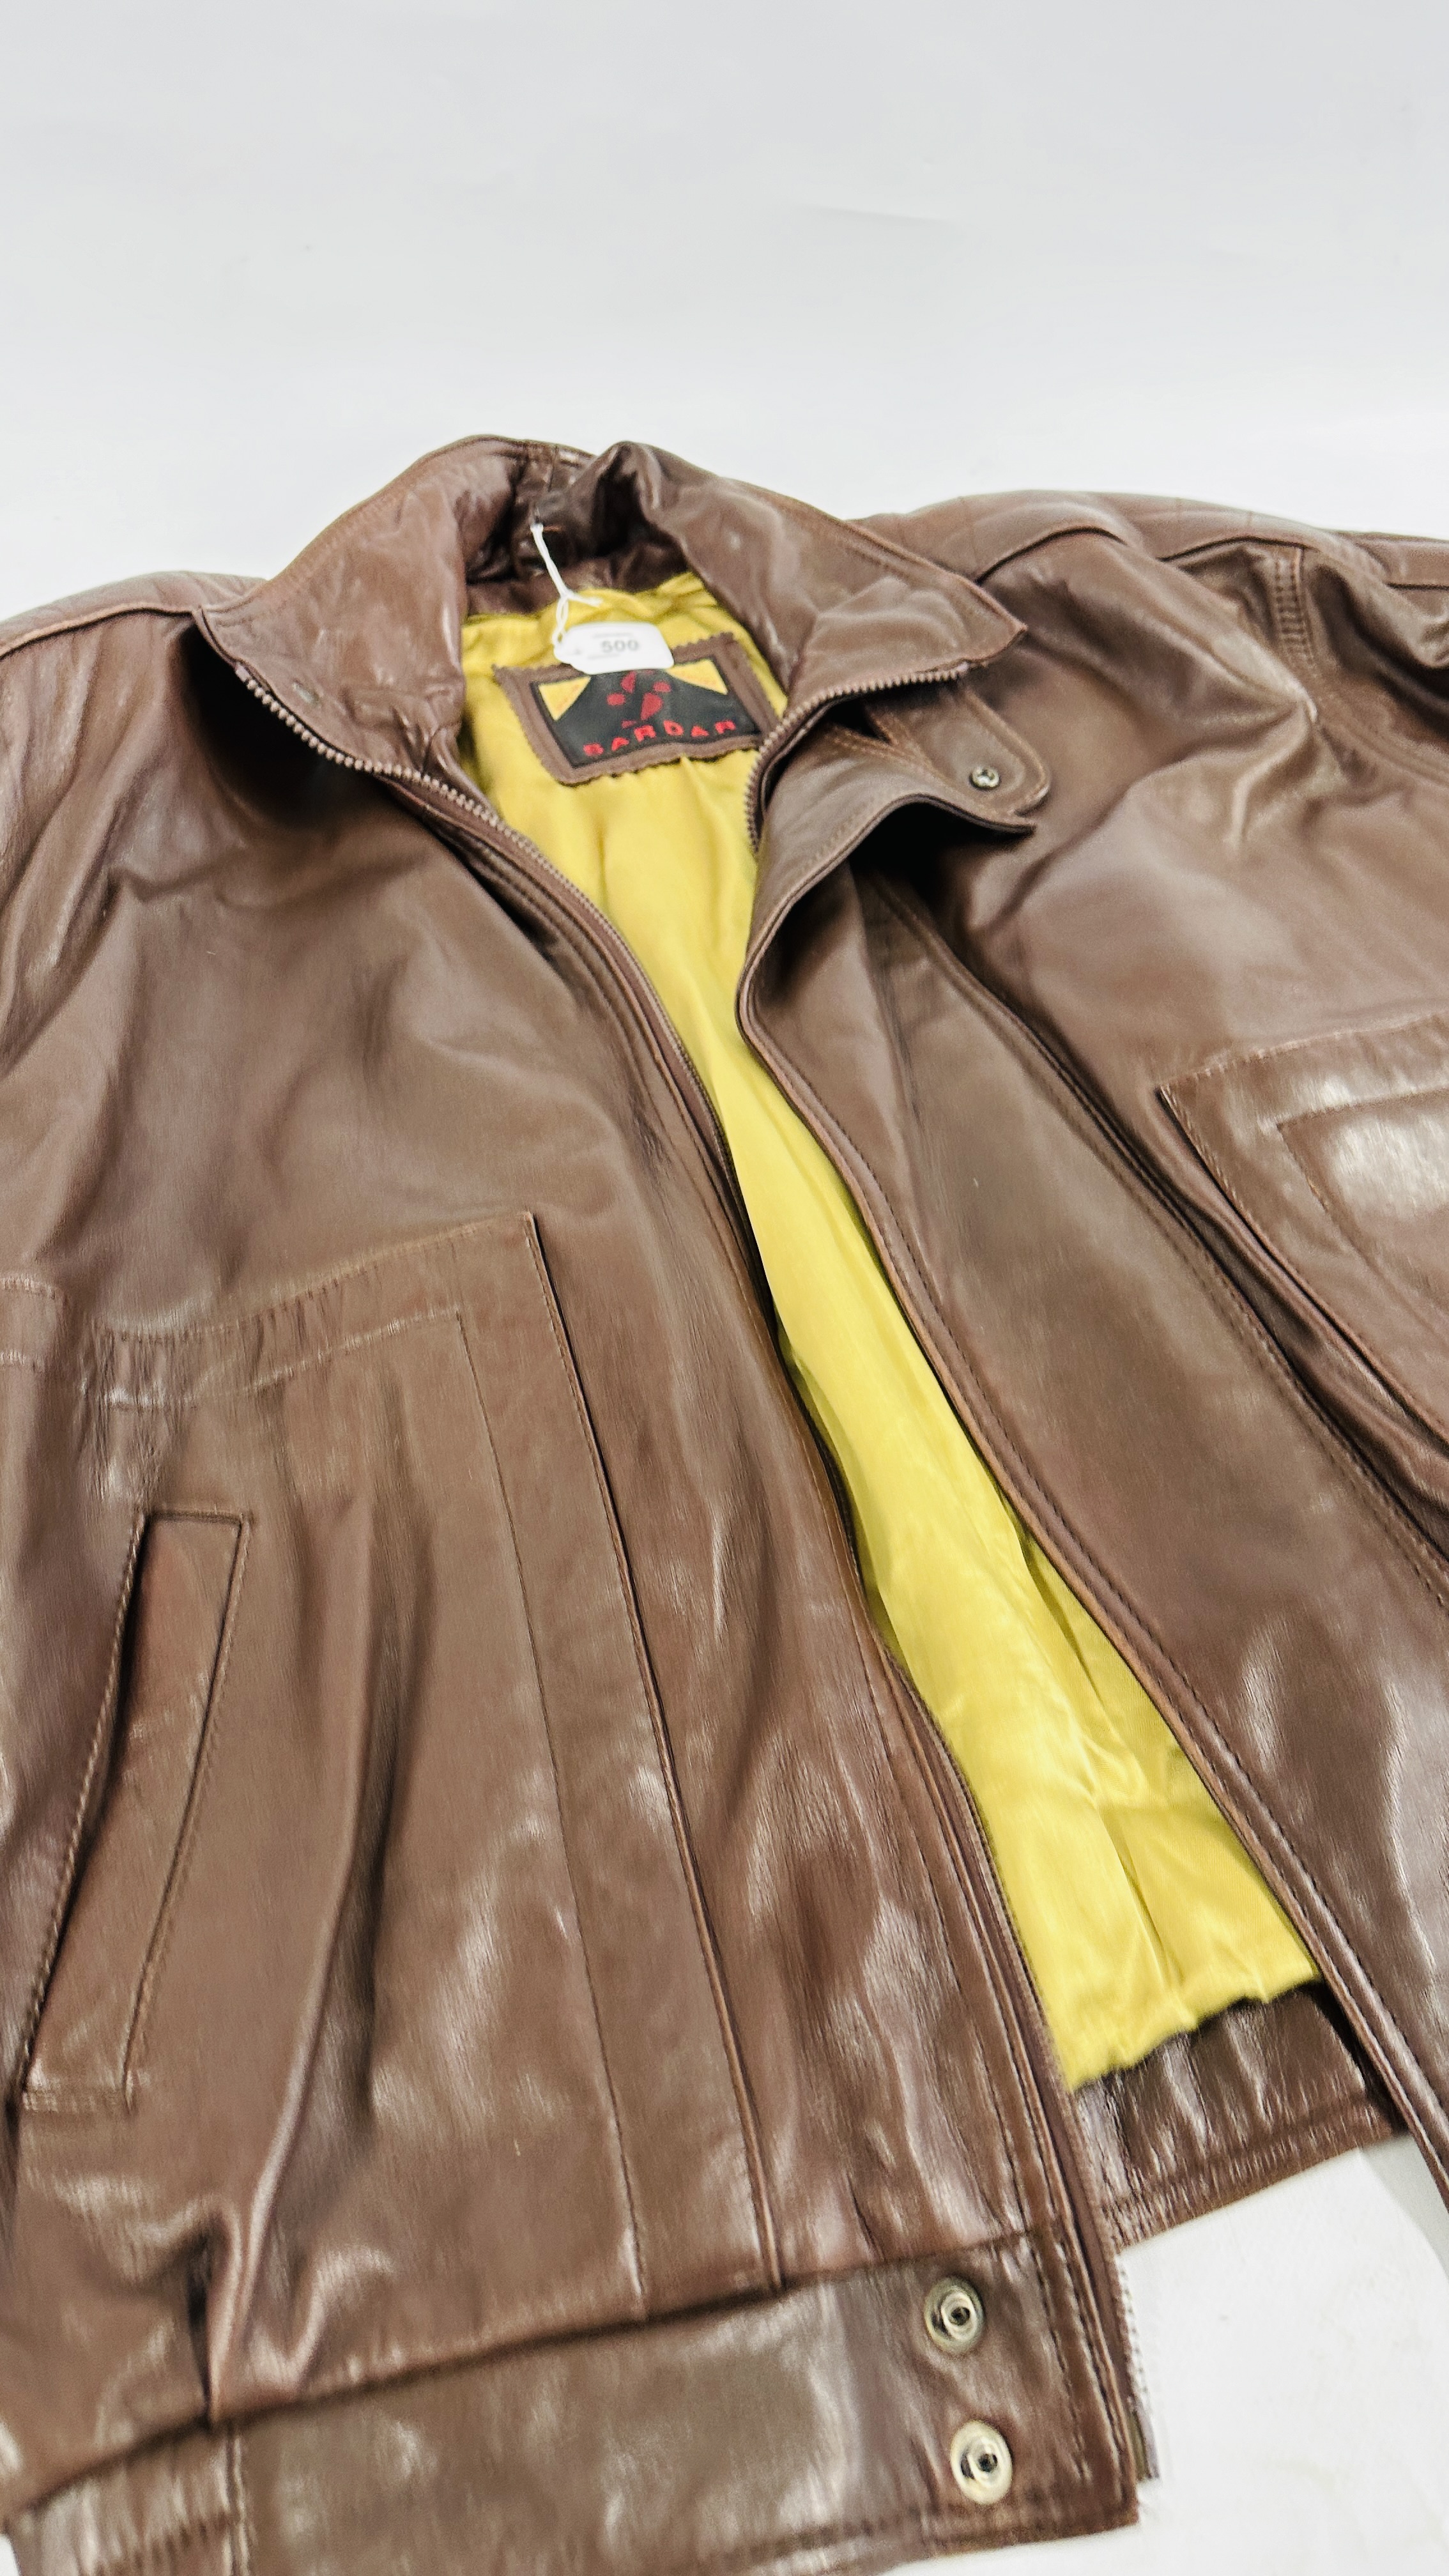 A GENTS BROWN LEATHER JACKET MARKED "SARDAR" SIZE L. - Image 7 of 9